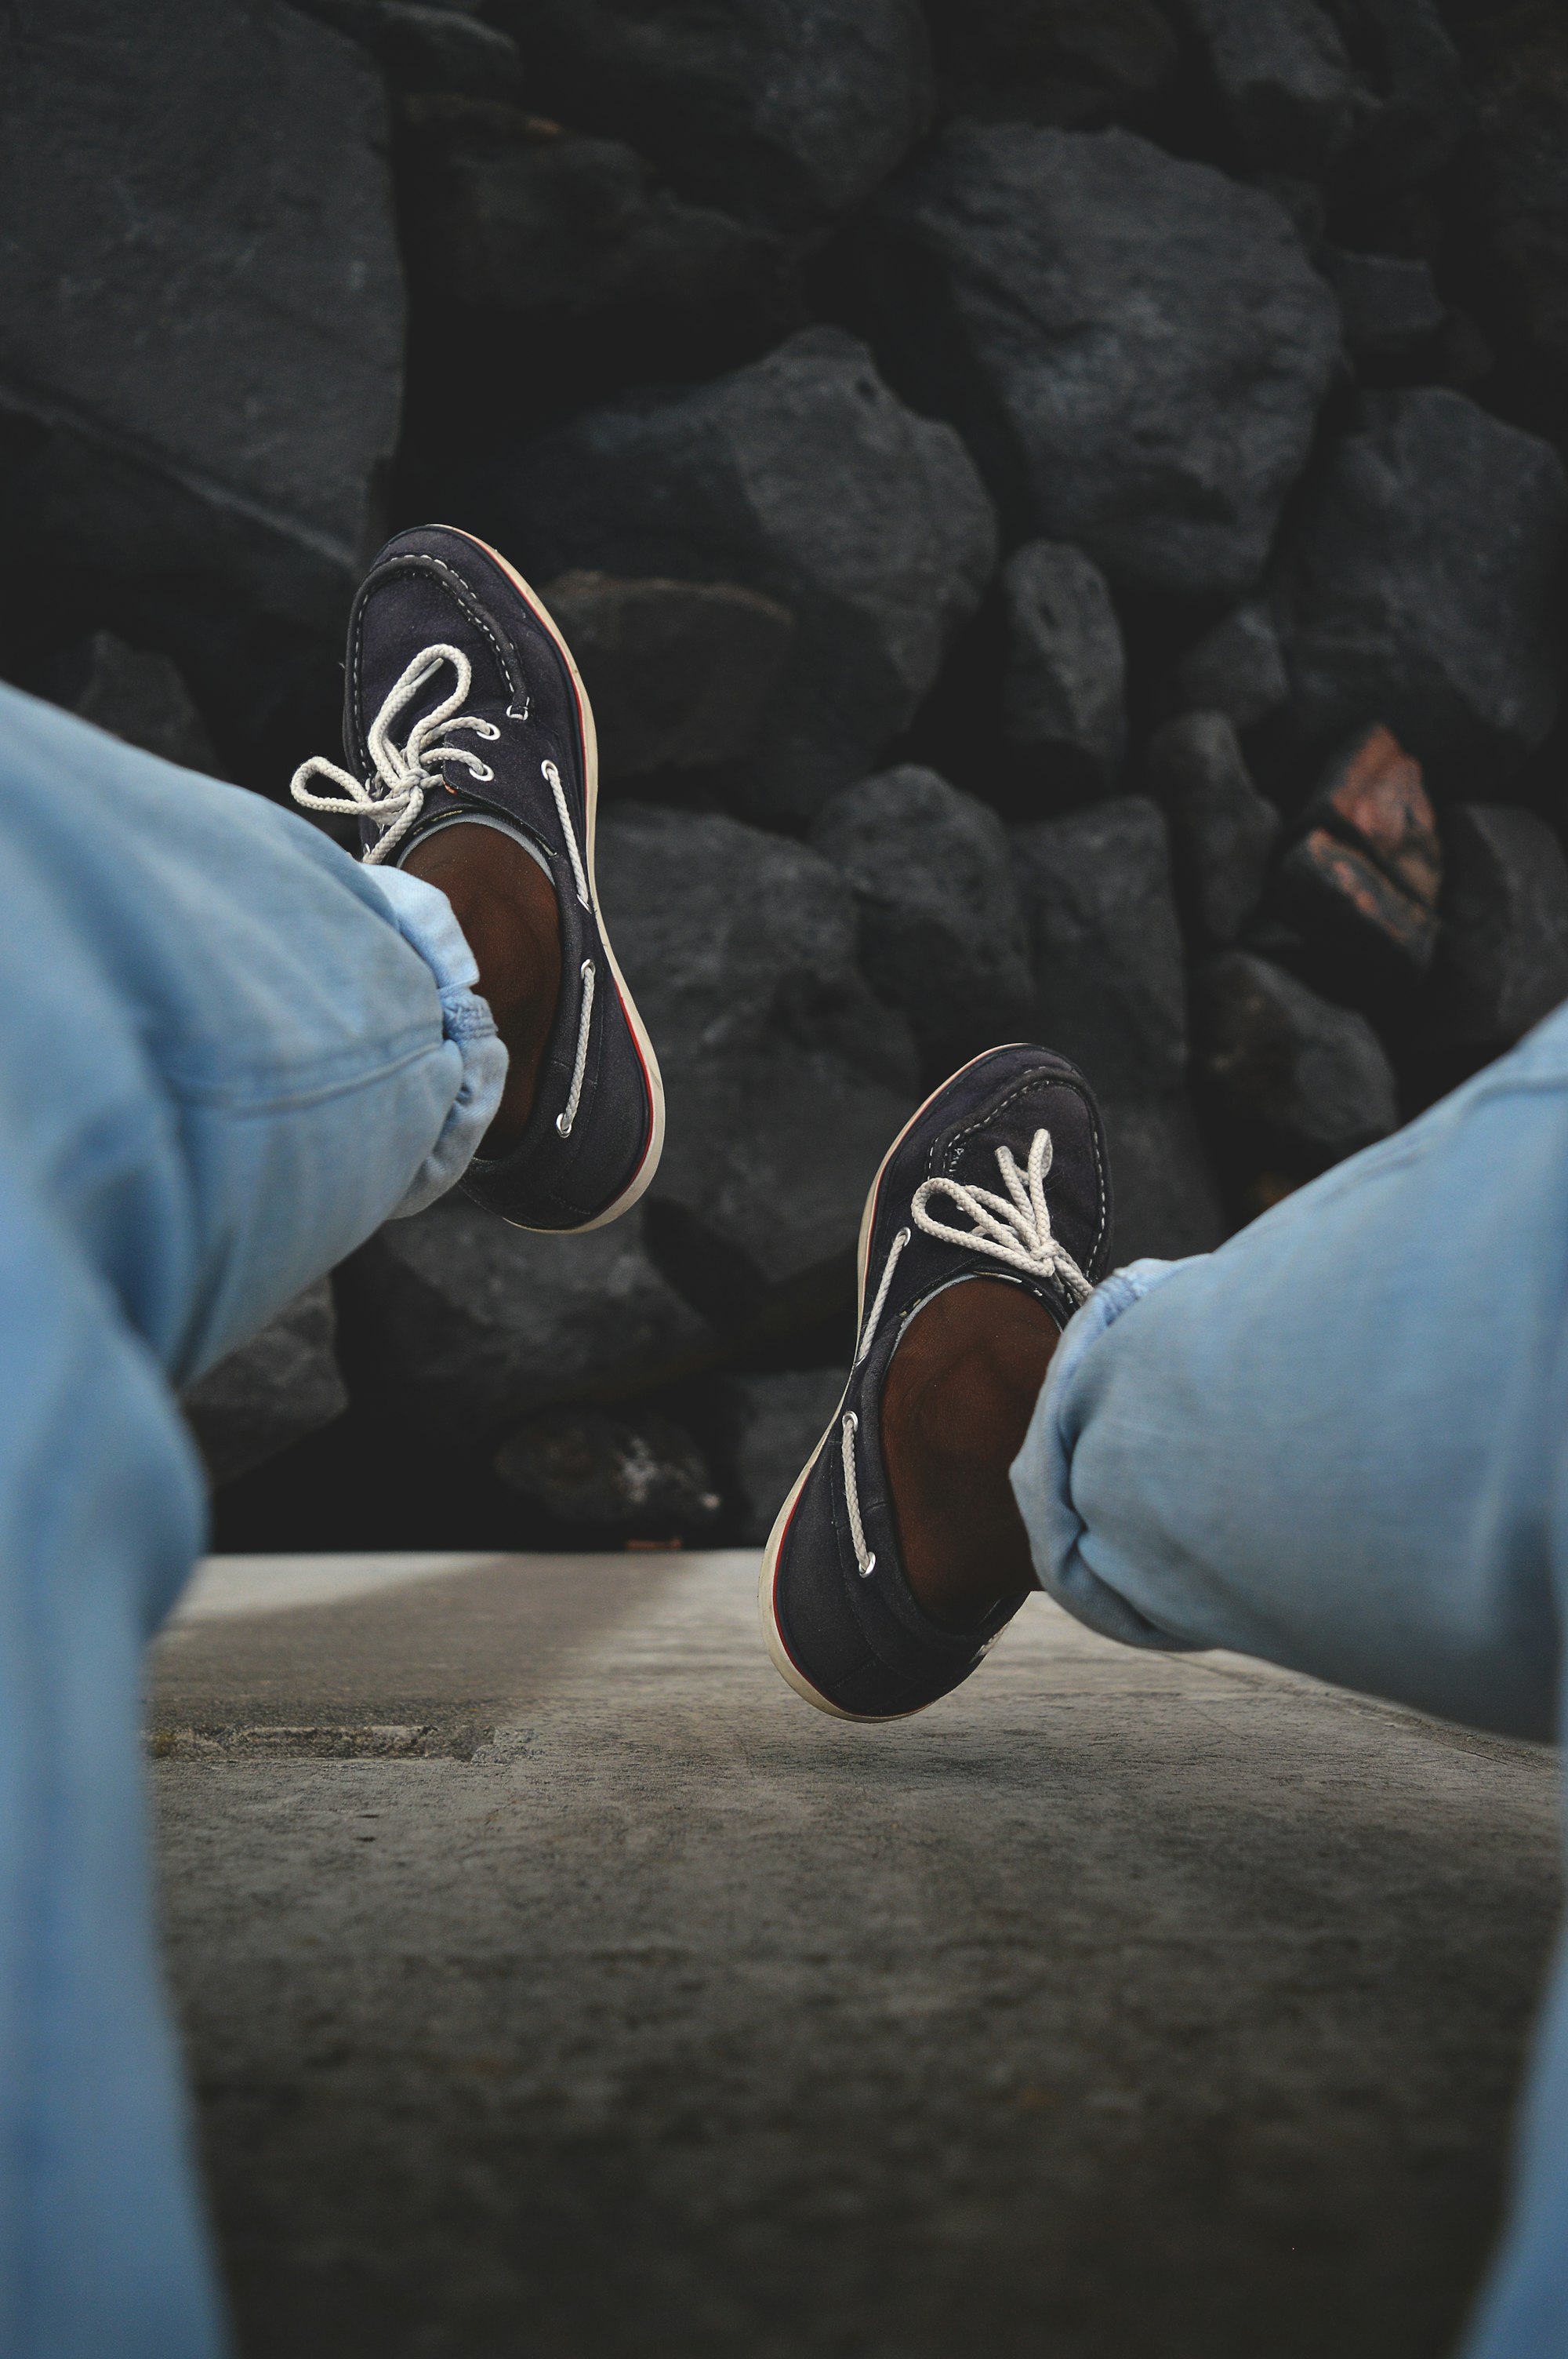 How to Clean Boat Shoes and Get Them Looking Shipshape